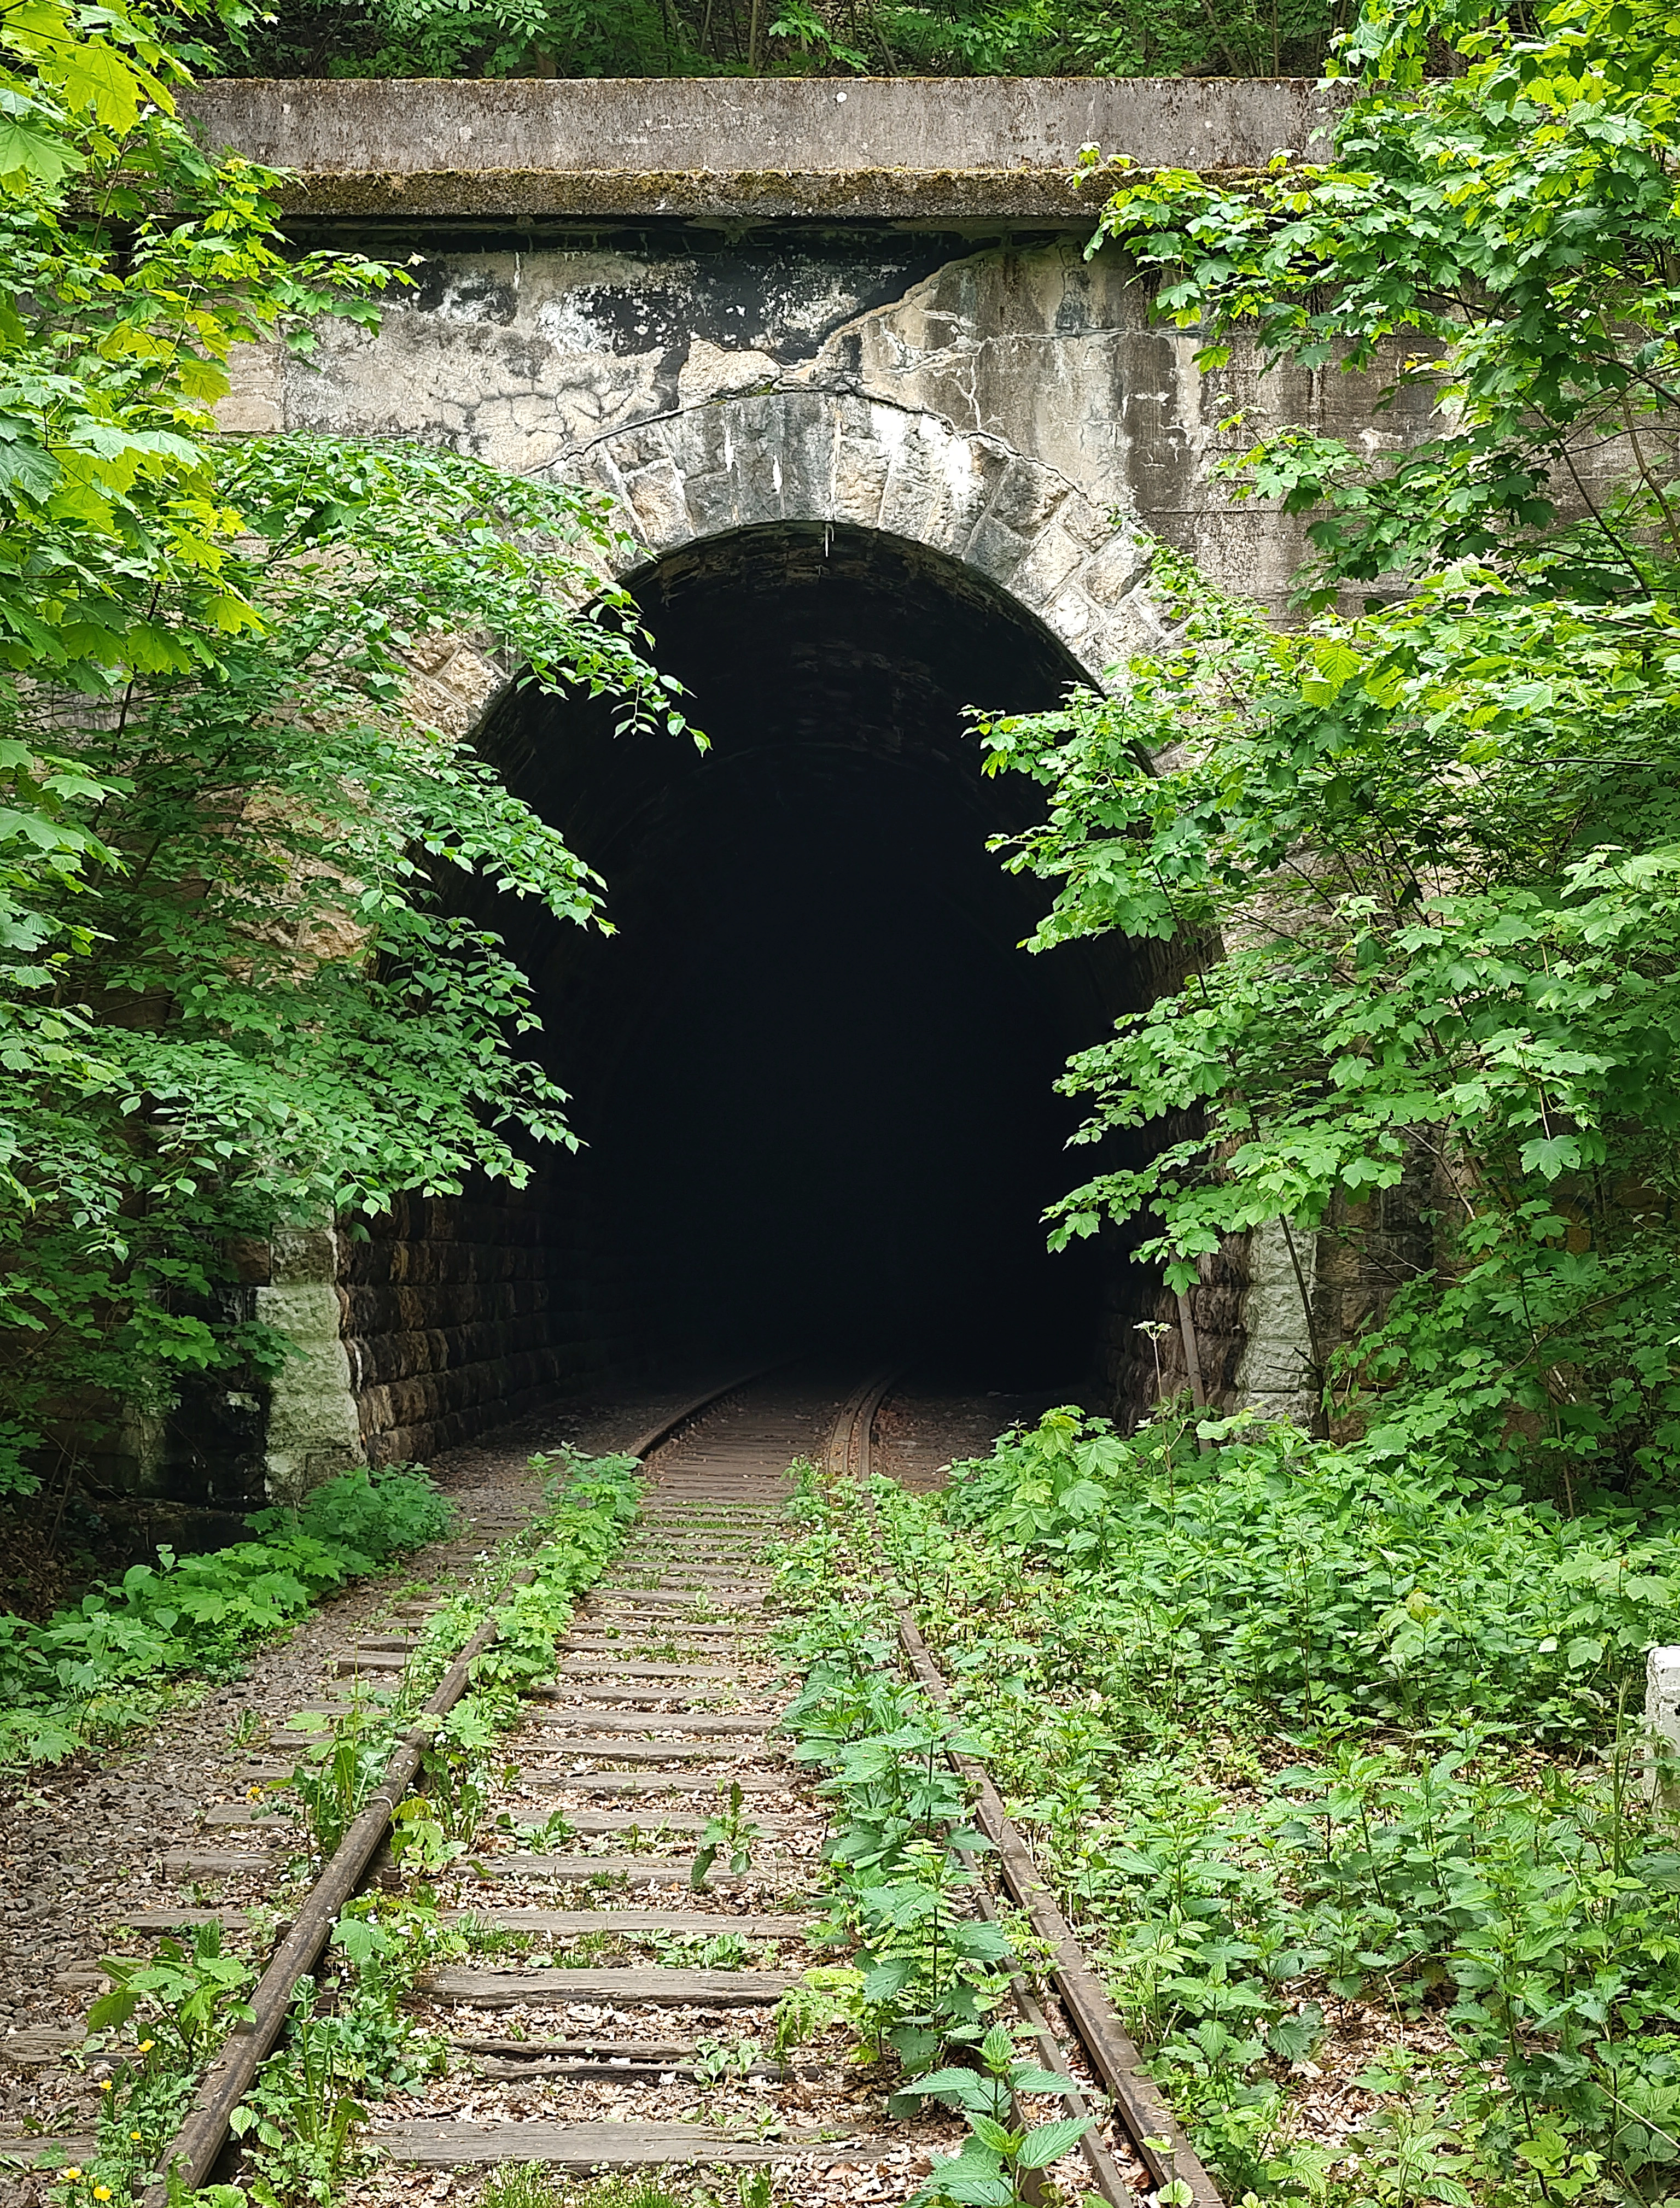 A railroad tunnel with overgrown tracks